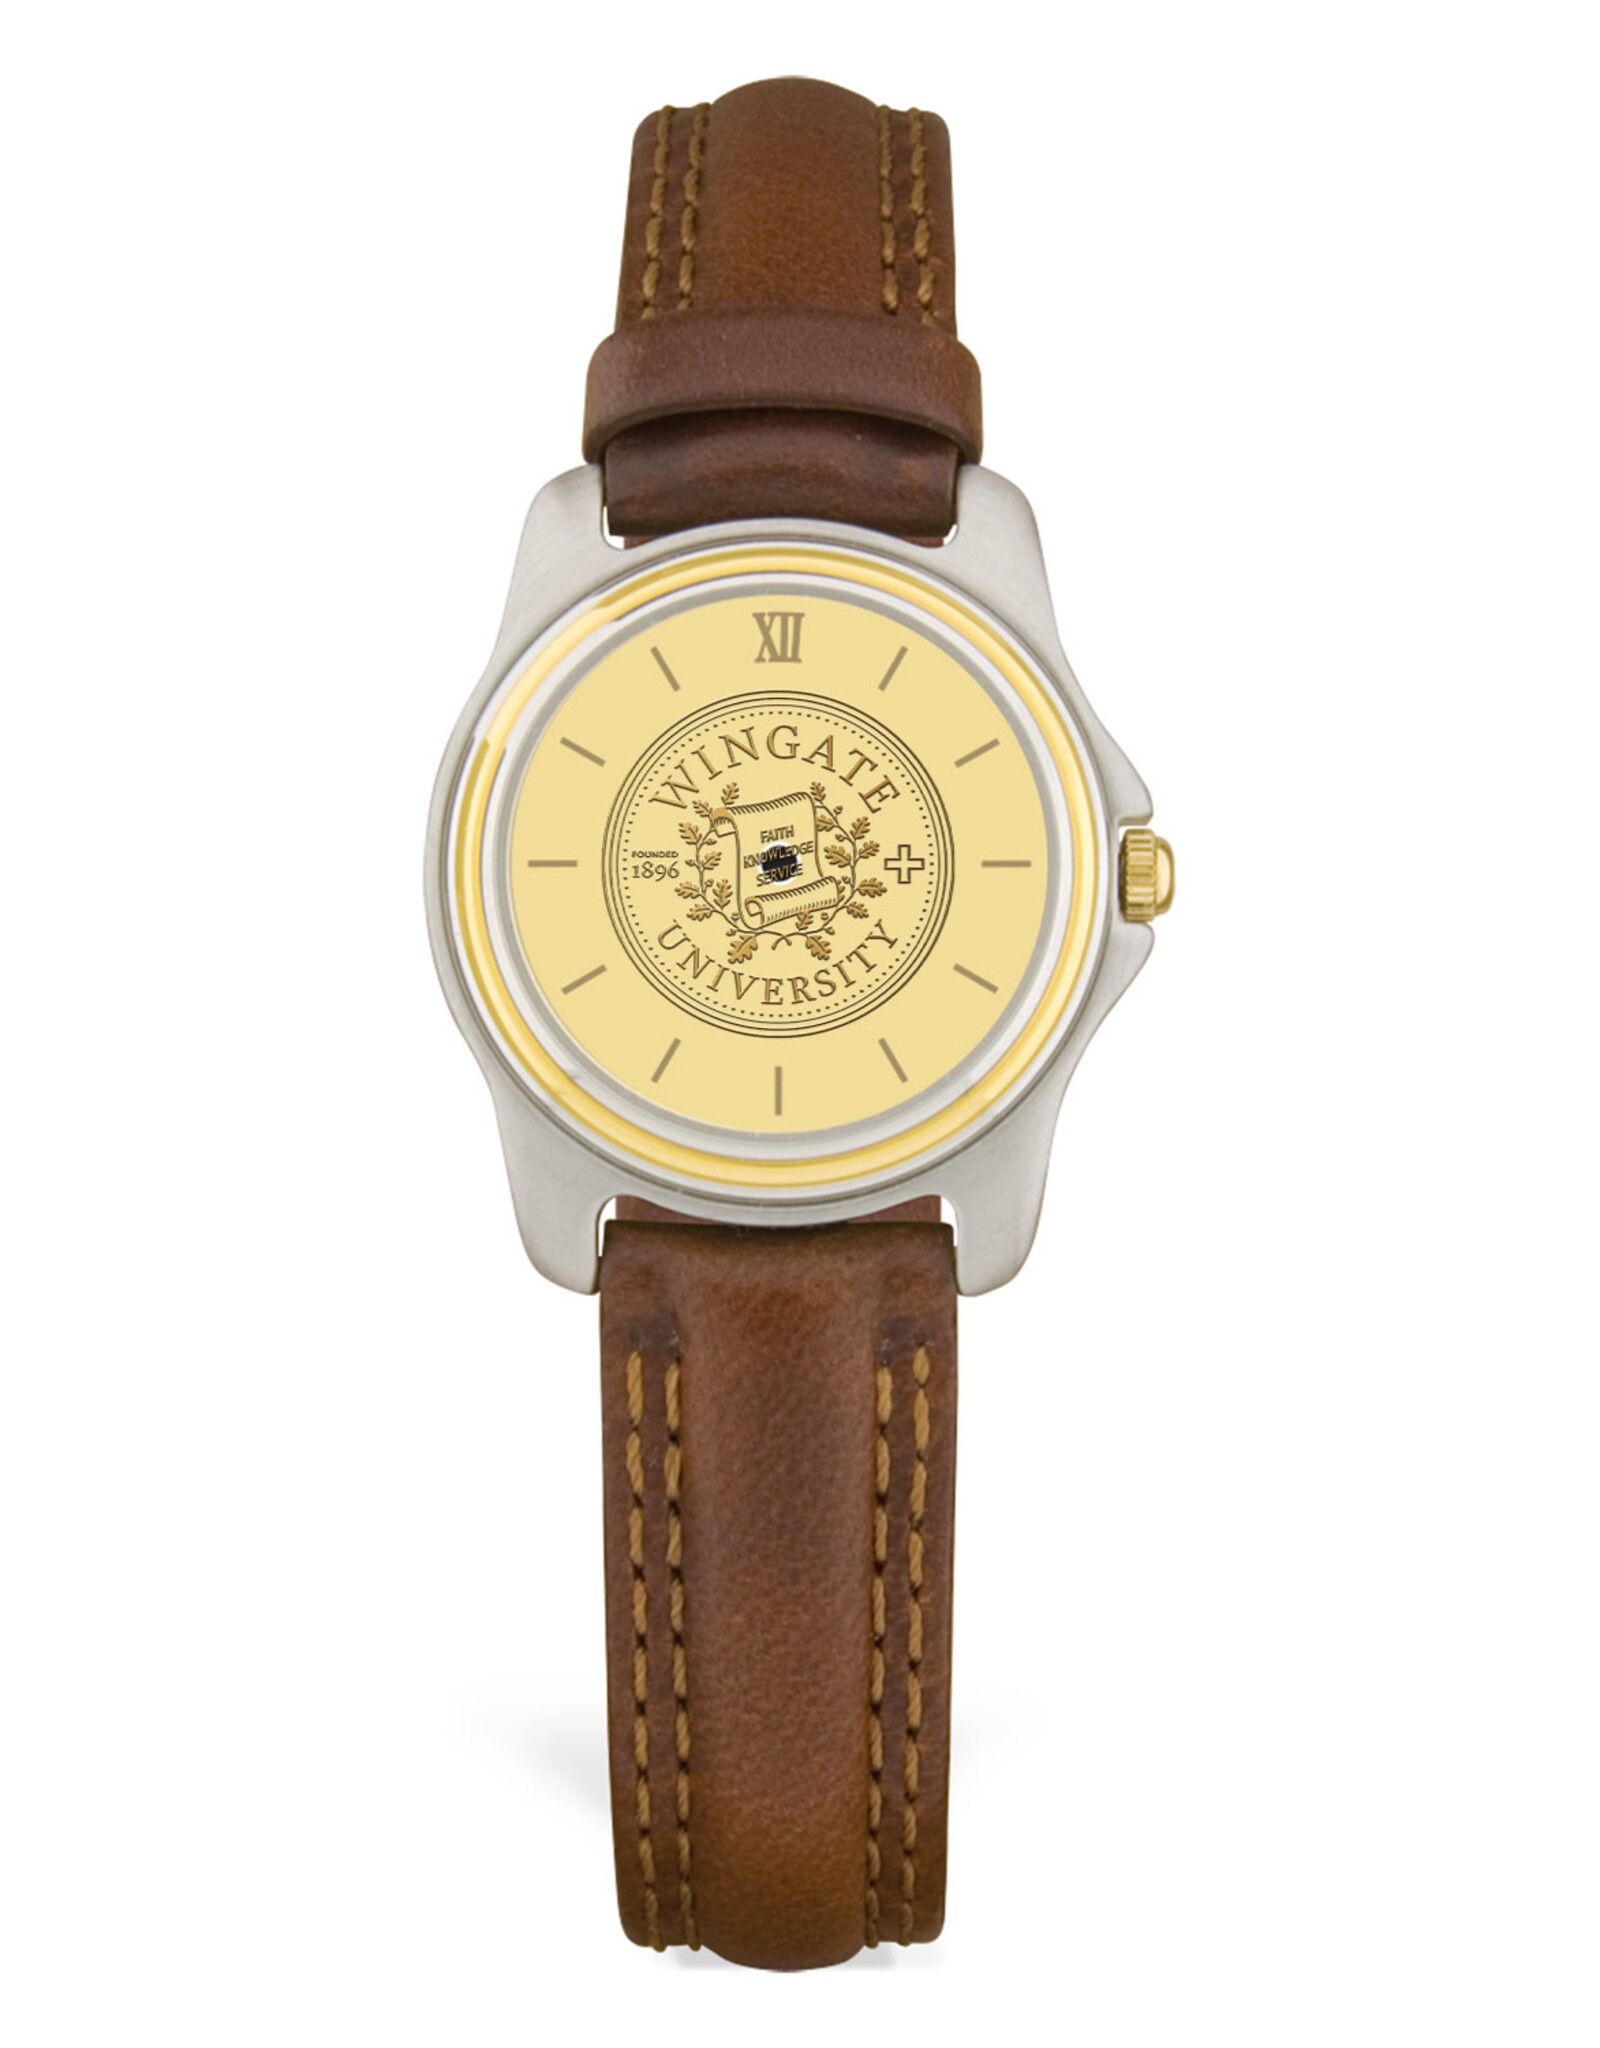 DROP SHIP ONLY Mens Brown Leather Wristwatch with Gold Wingate Seal Face (ONLINE ONLY)